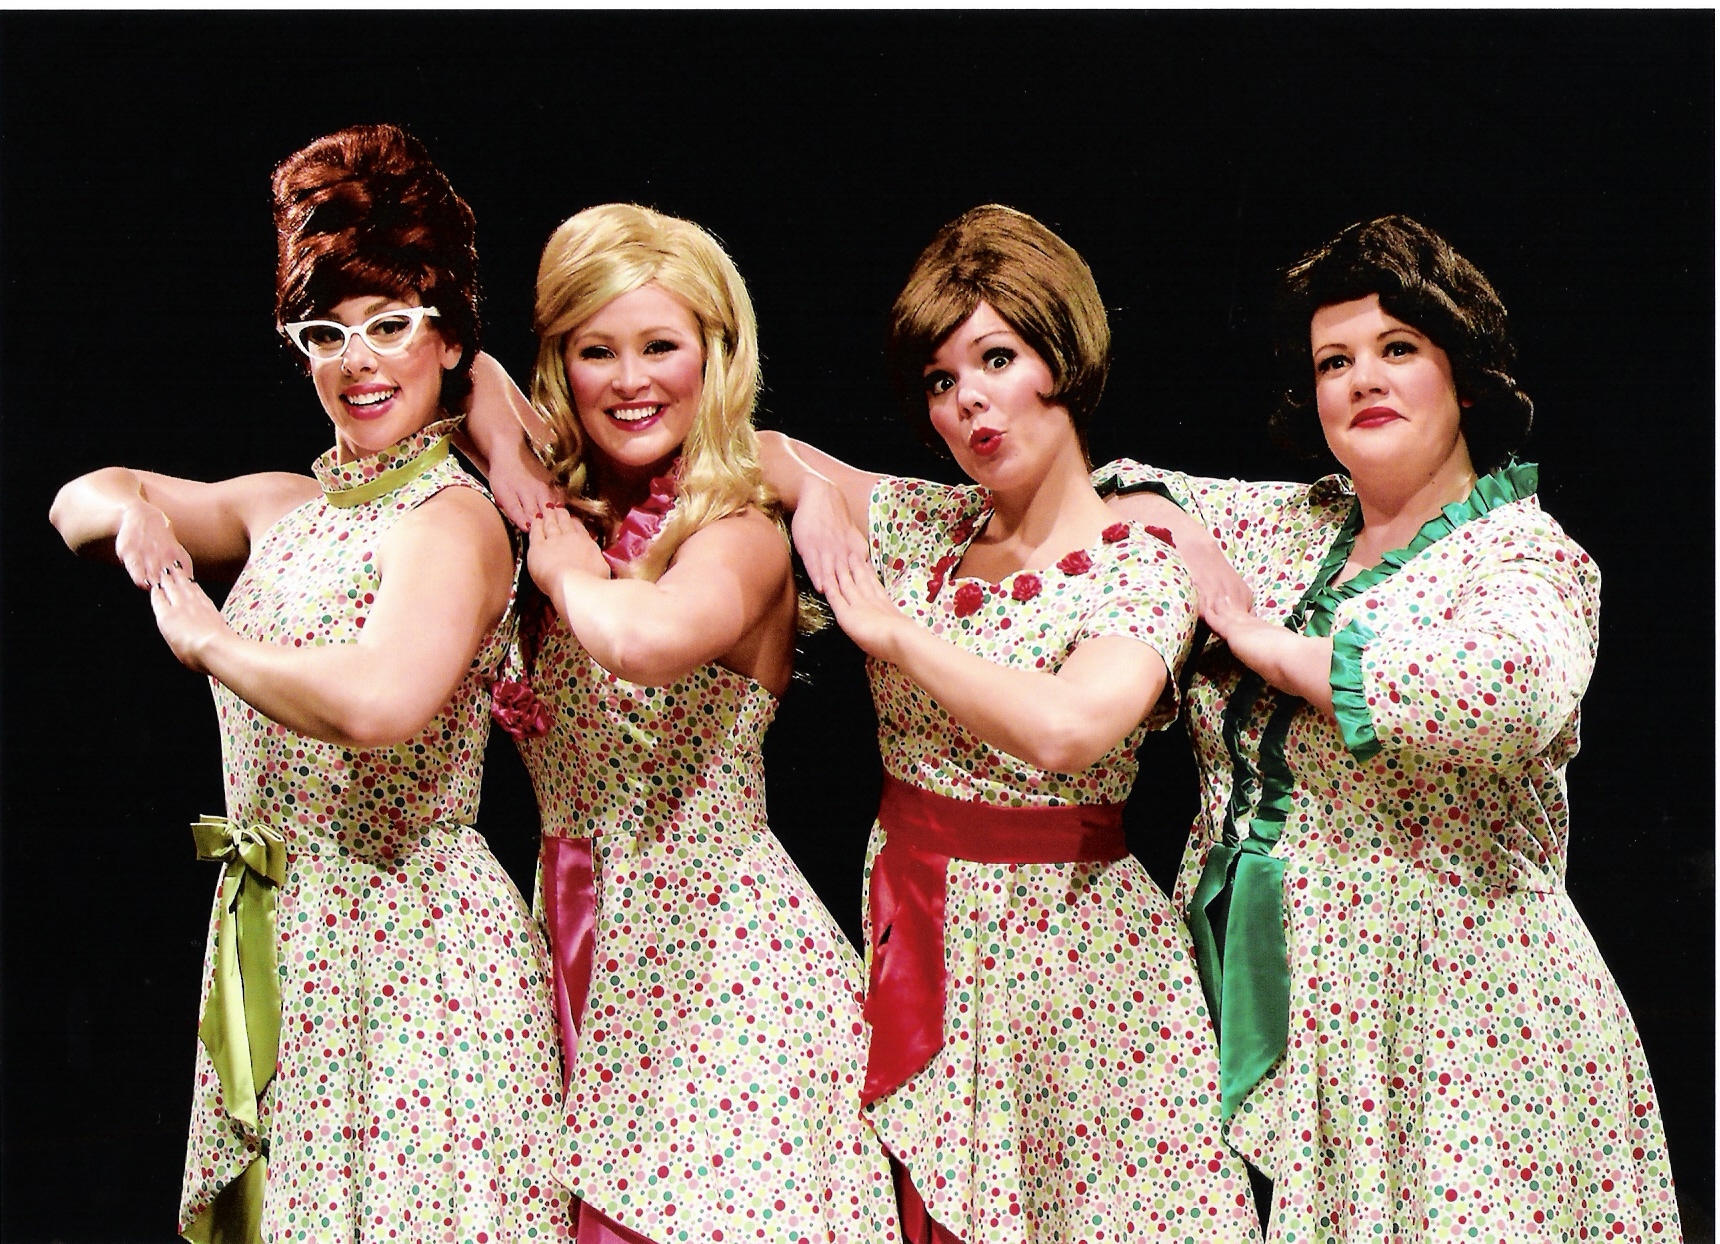 Derby Dinner Playhouse Gets the Holidays Started with “Winter Wonderettes”